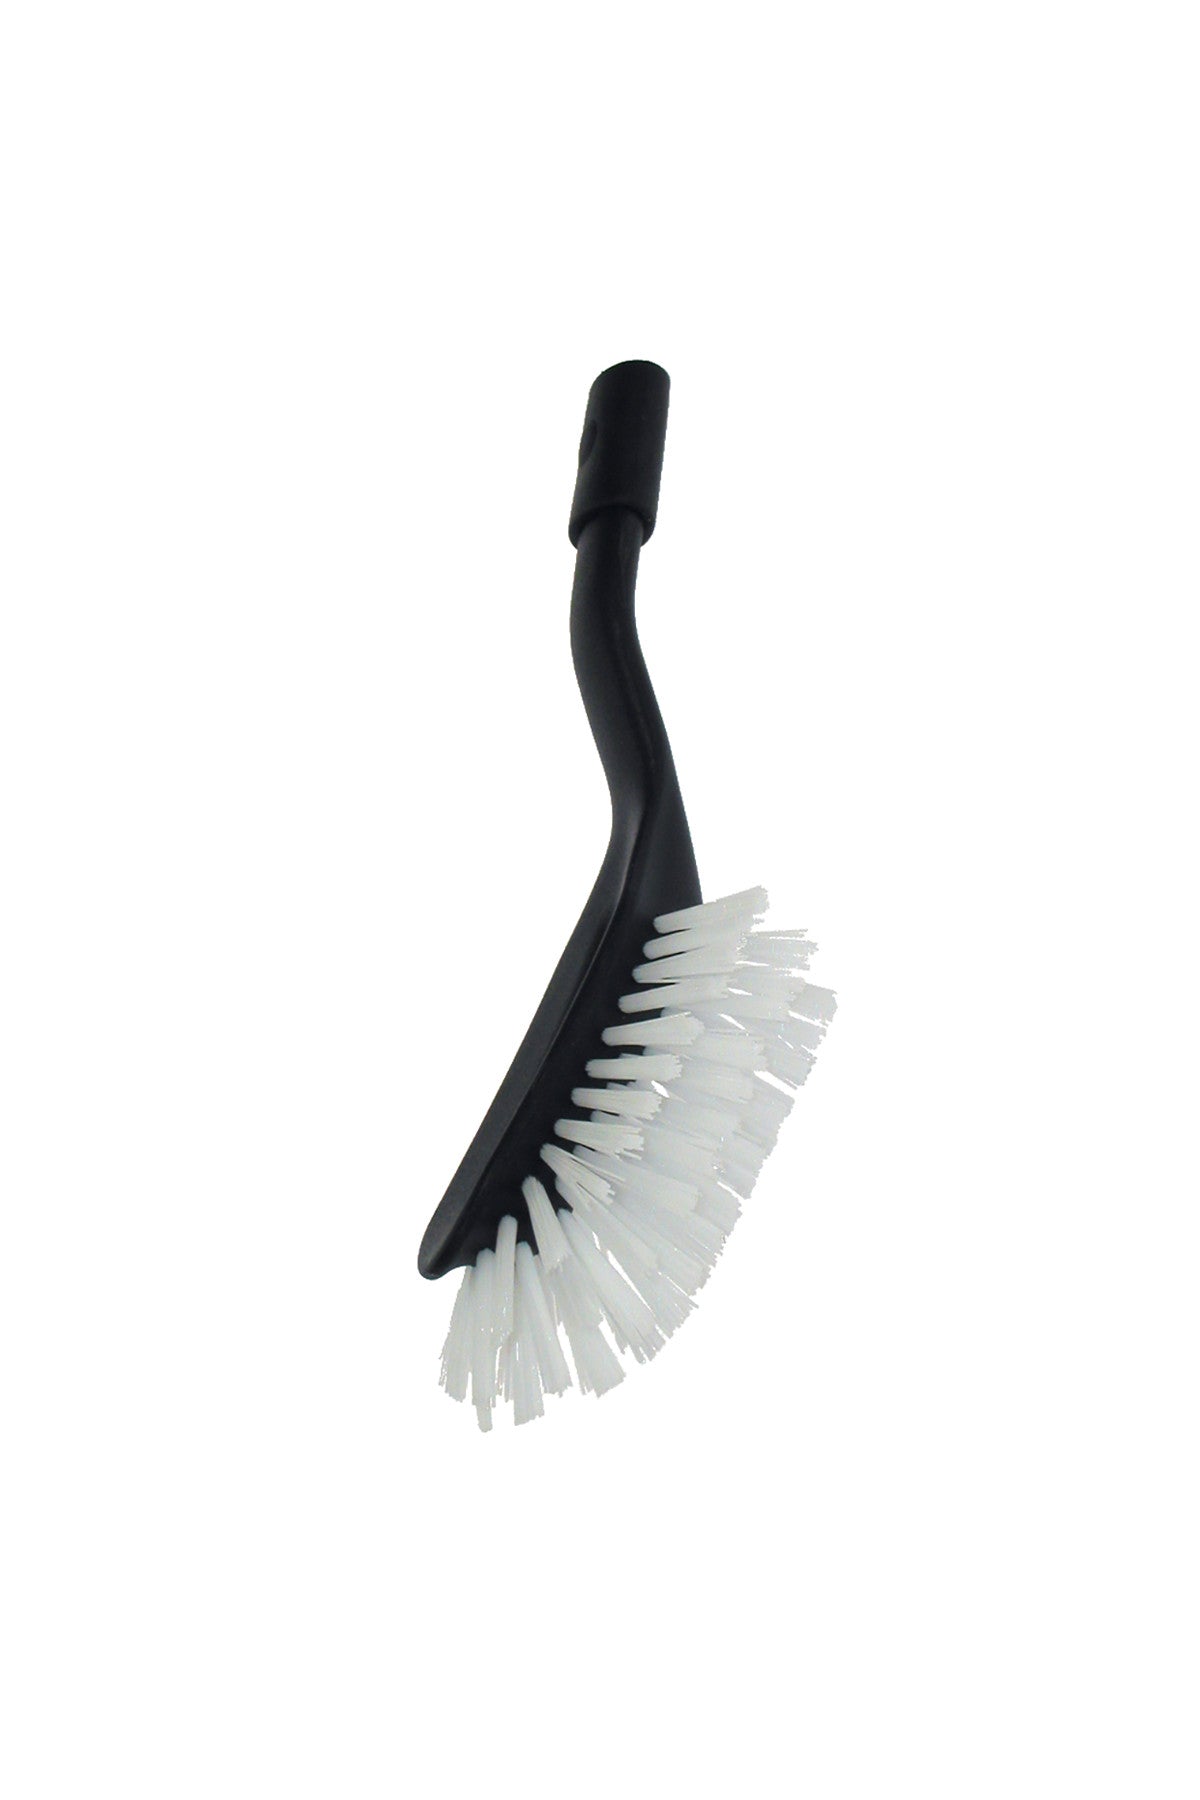 DISH BRUSH REPLACEMENT HEAD STEELY